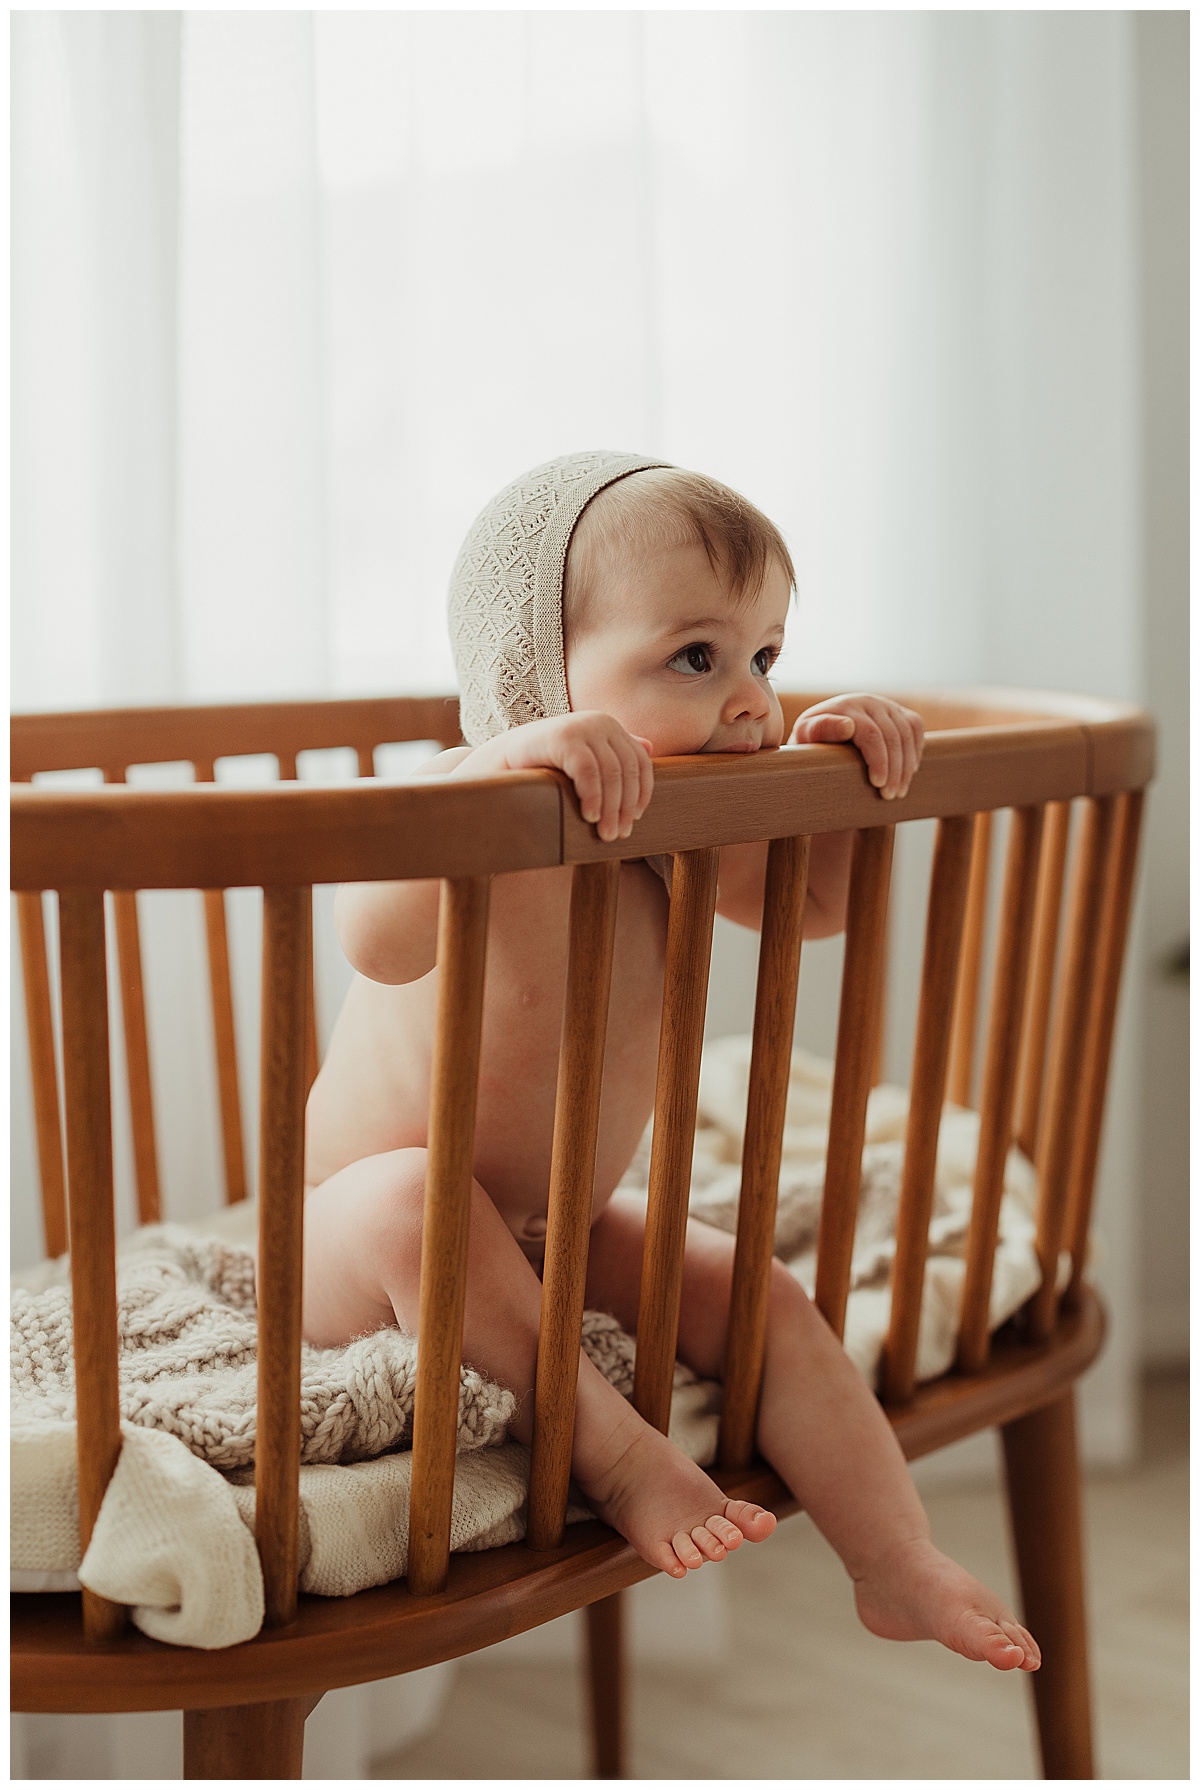 Little baby sits on the crib for Unposed Lifestyle Family Photos